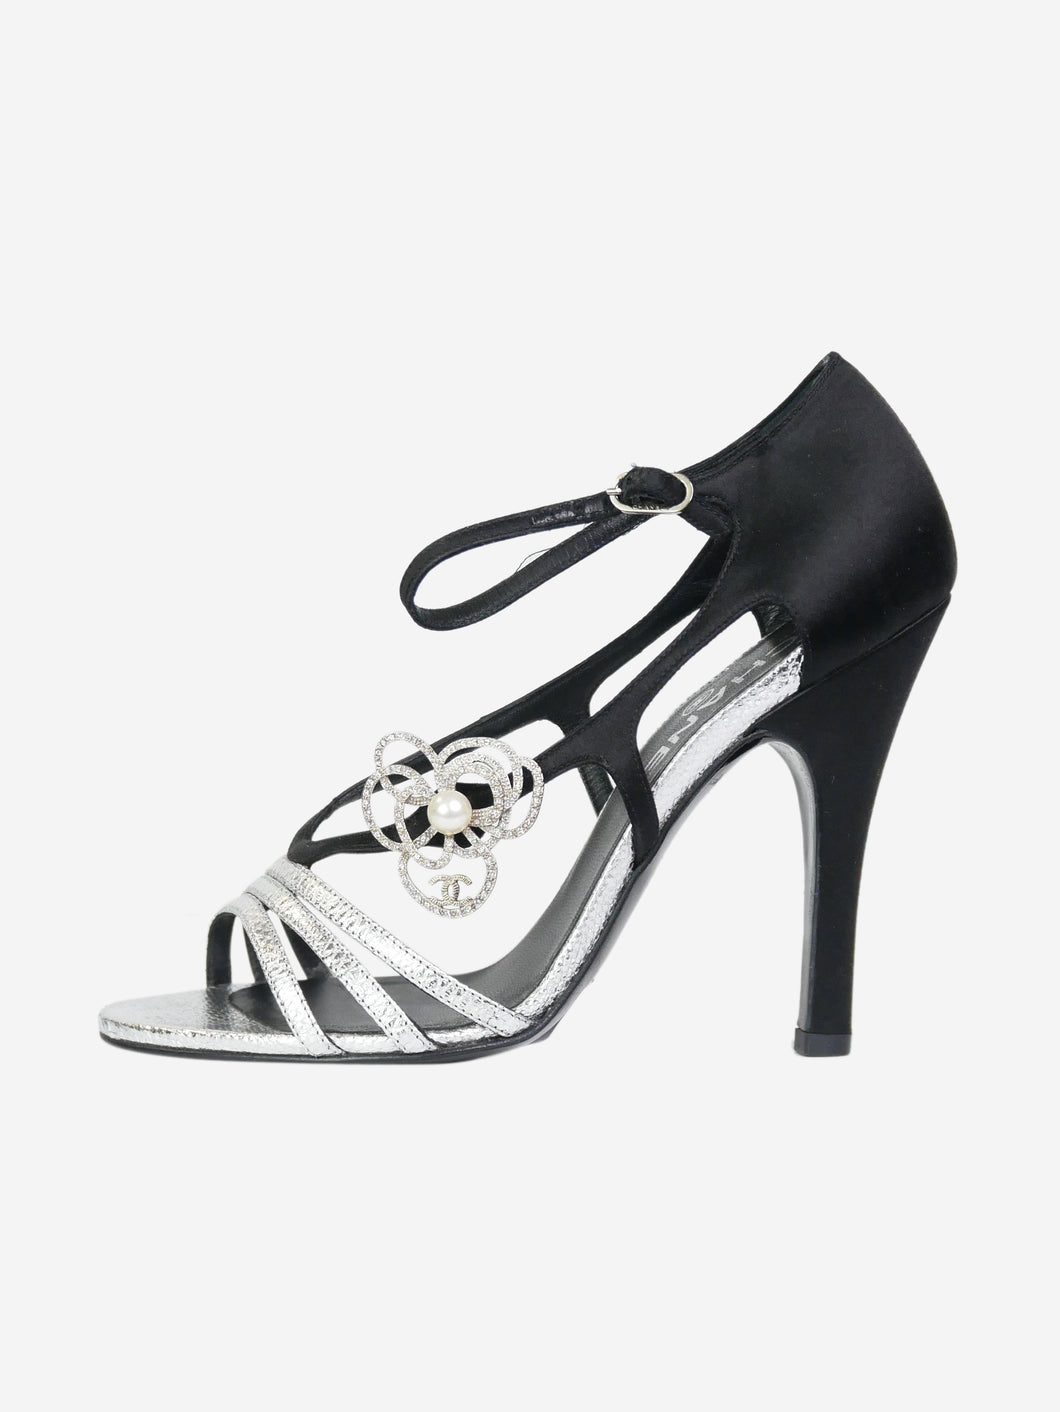 chanel spectator shoes 12